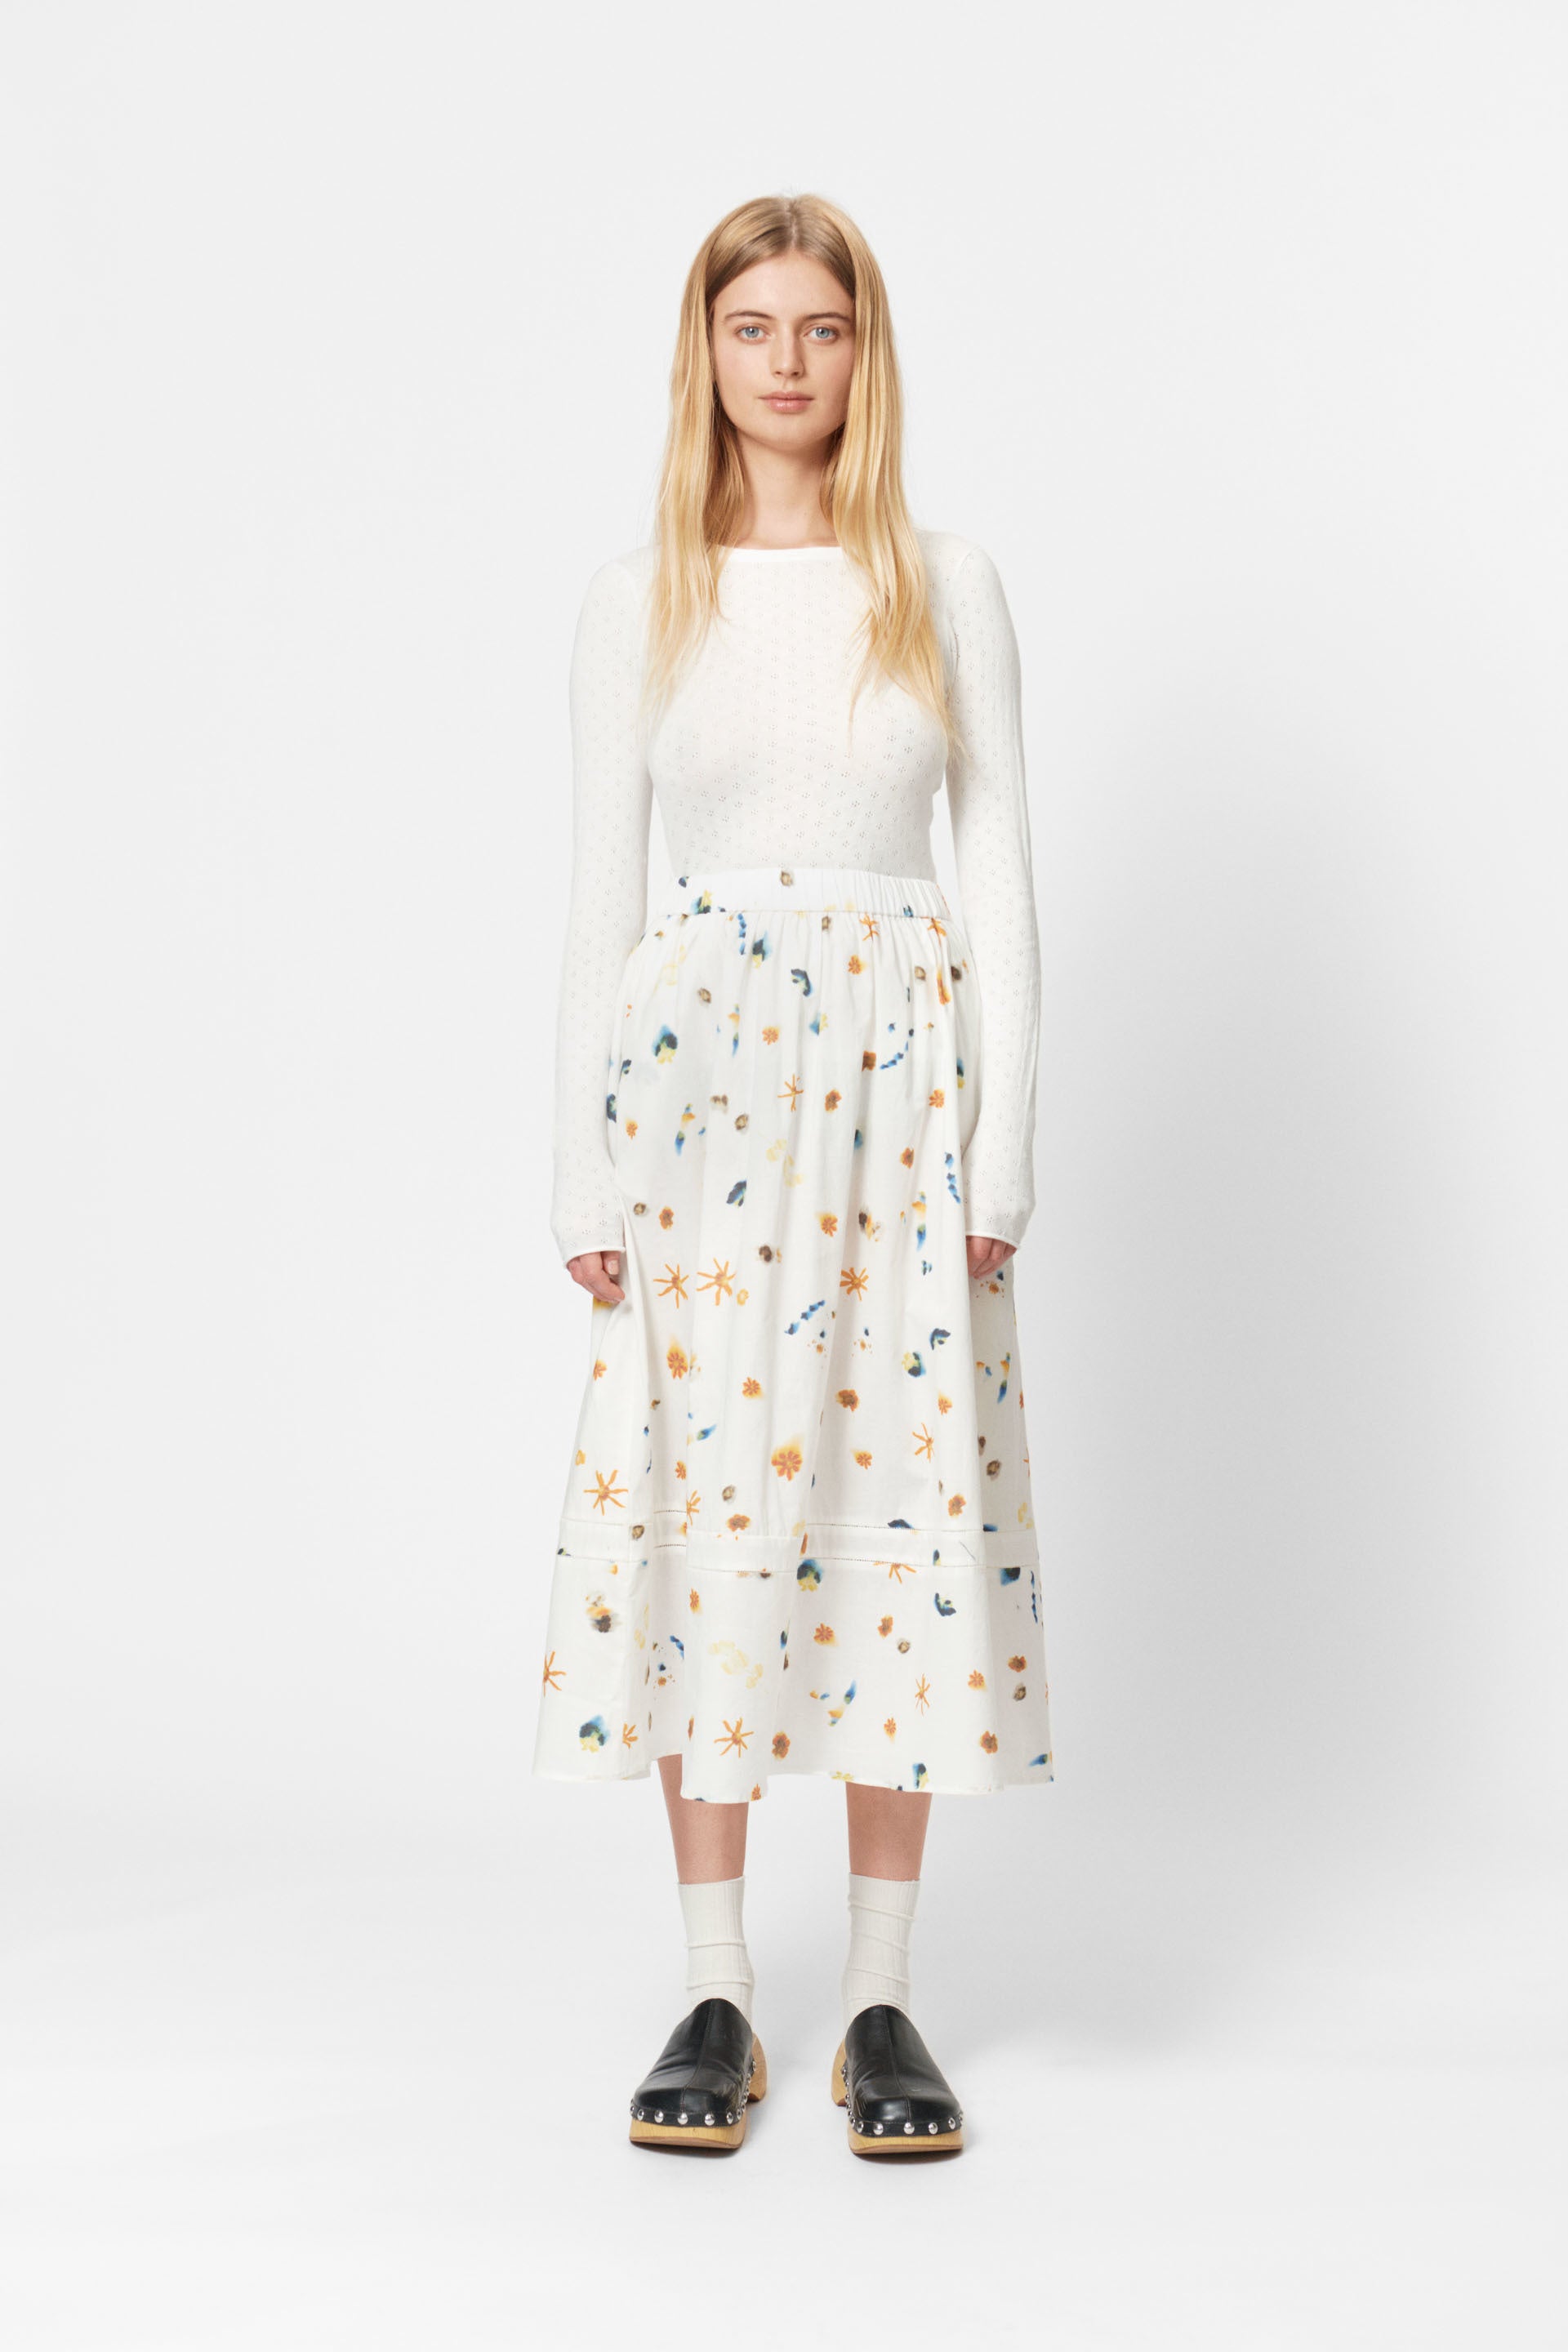 nué notes Bowie Skirt SKIRTS 103 Yellow Cream